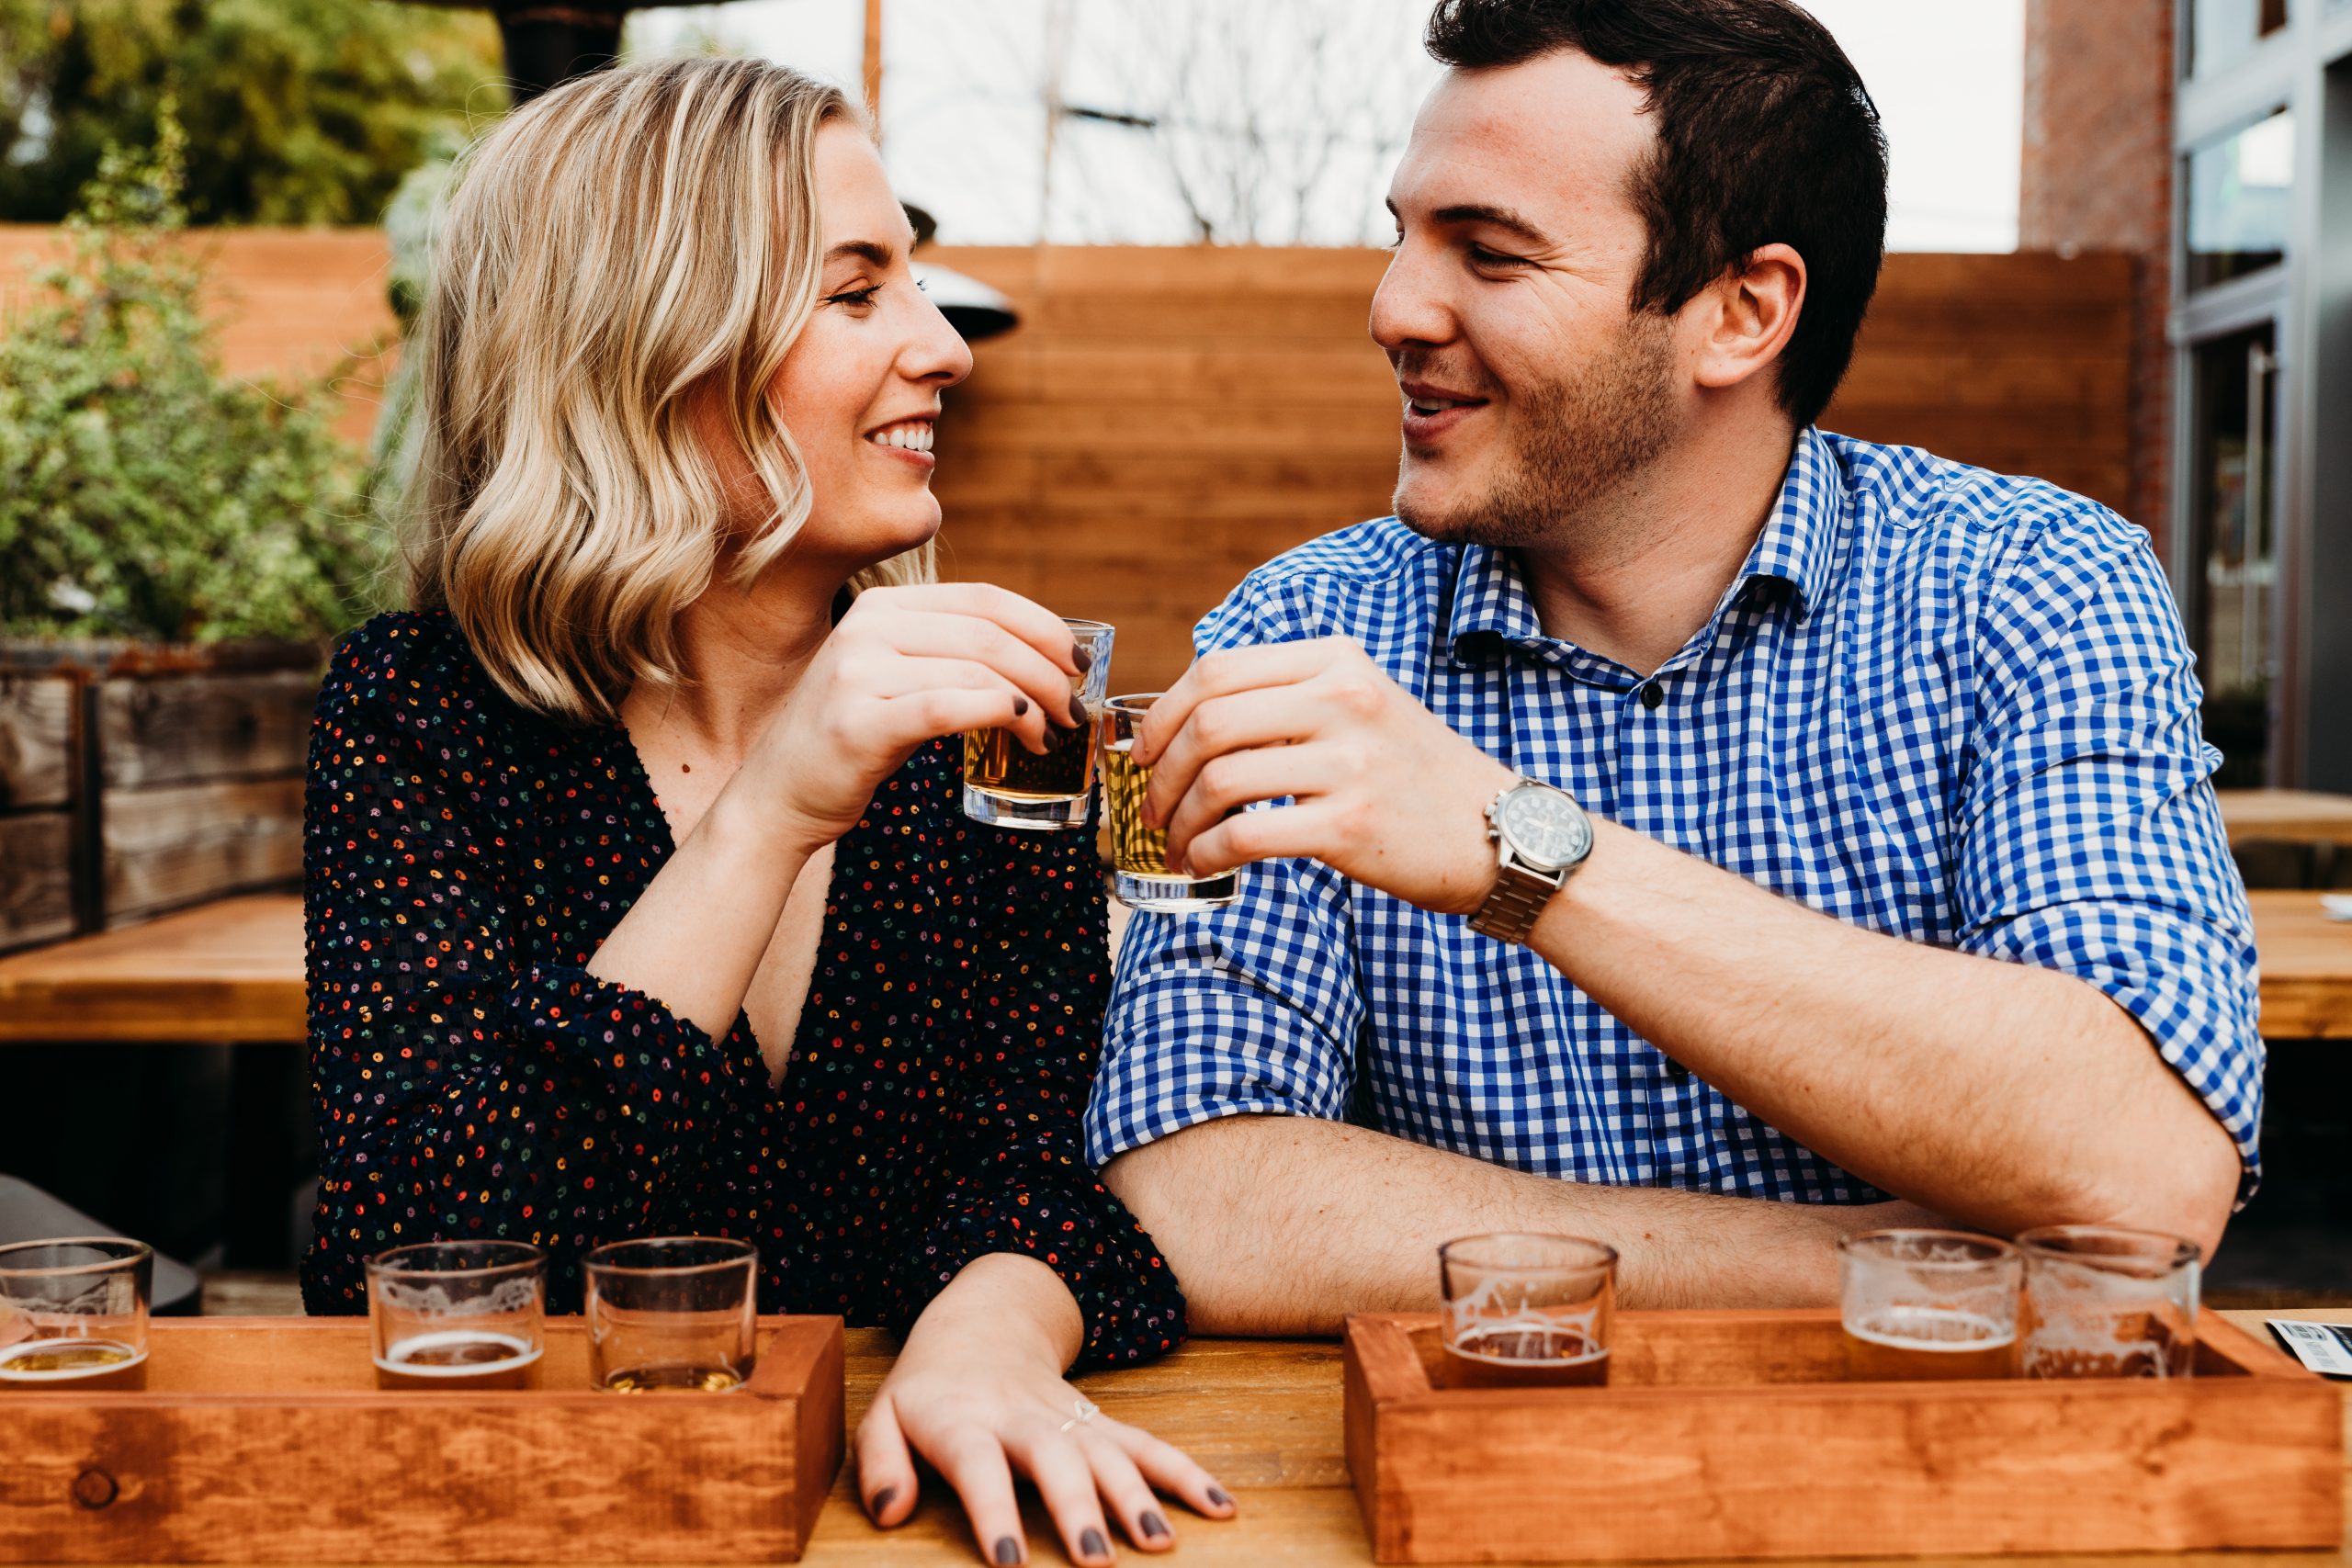 Turn Your Engagement Shoot into Date Night!